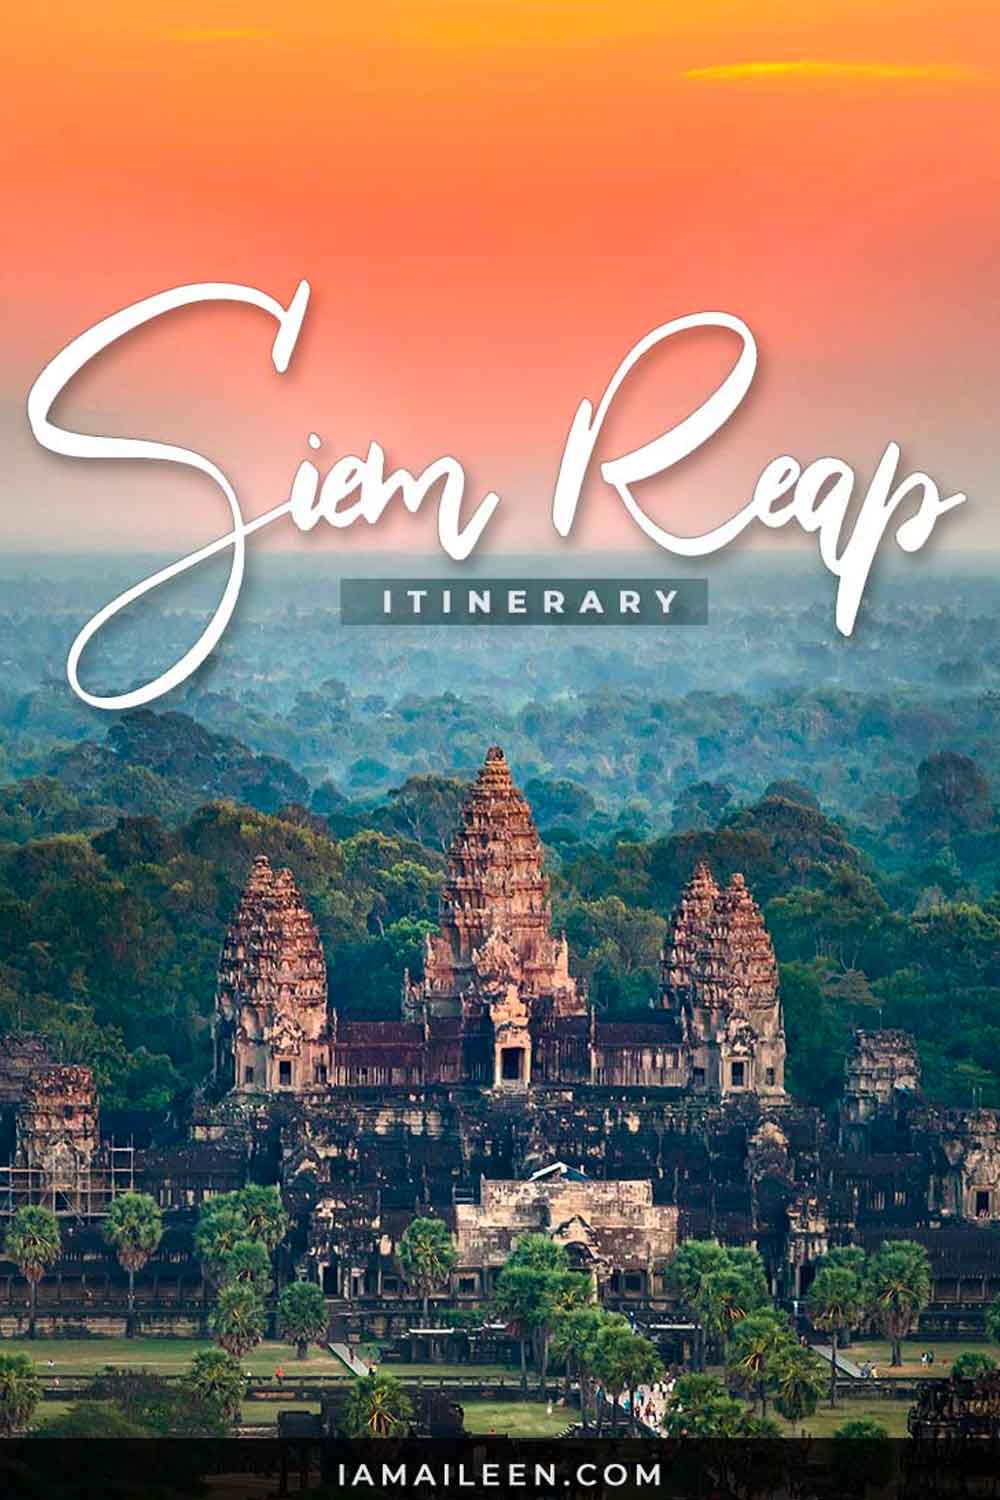 Siem Reap Itinerary & Travel Guide for 3 Days or More (DIY Trip to Cambodia)